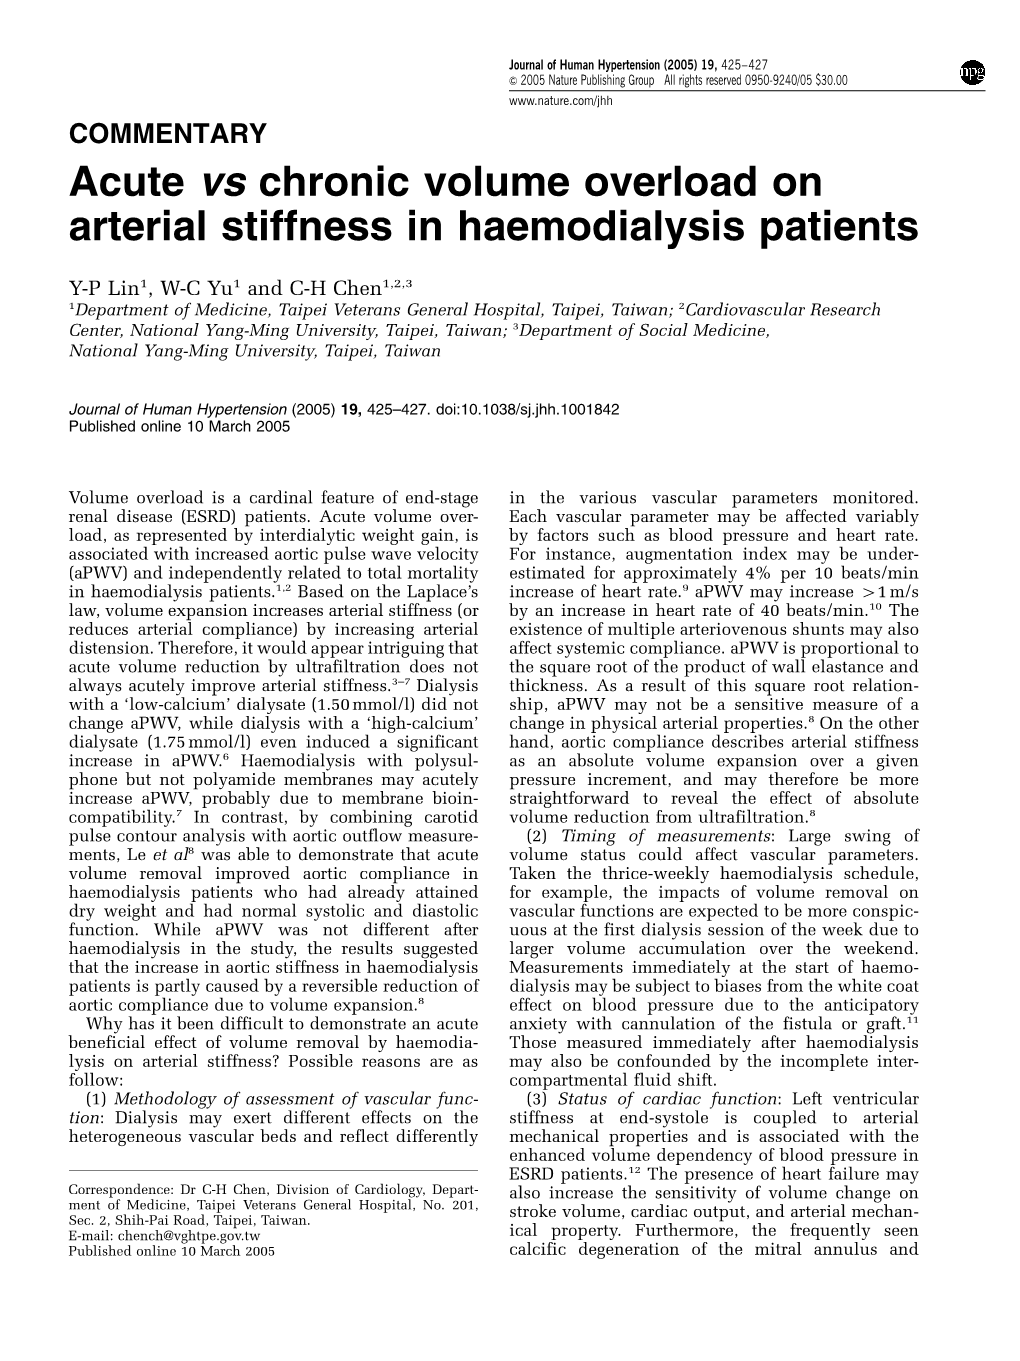 Acute Vs Chronic Volume Overload on Arterial Stiffness in Haemodialysis Patients